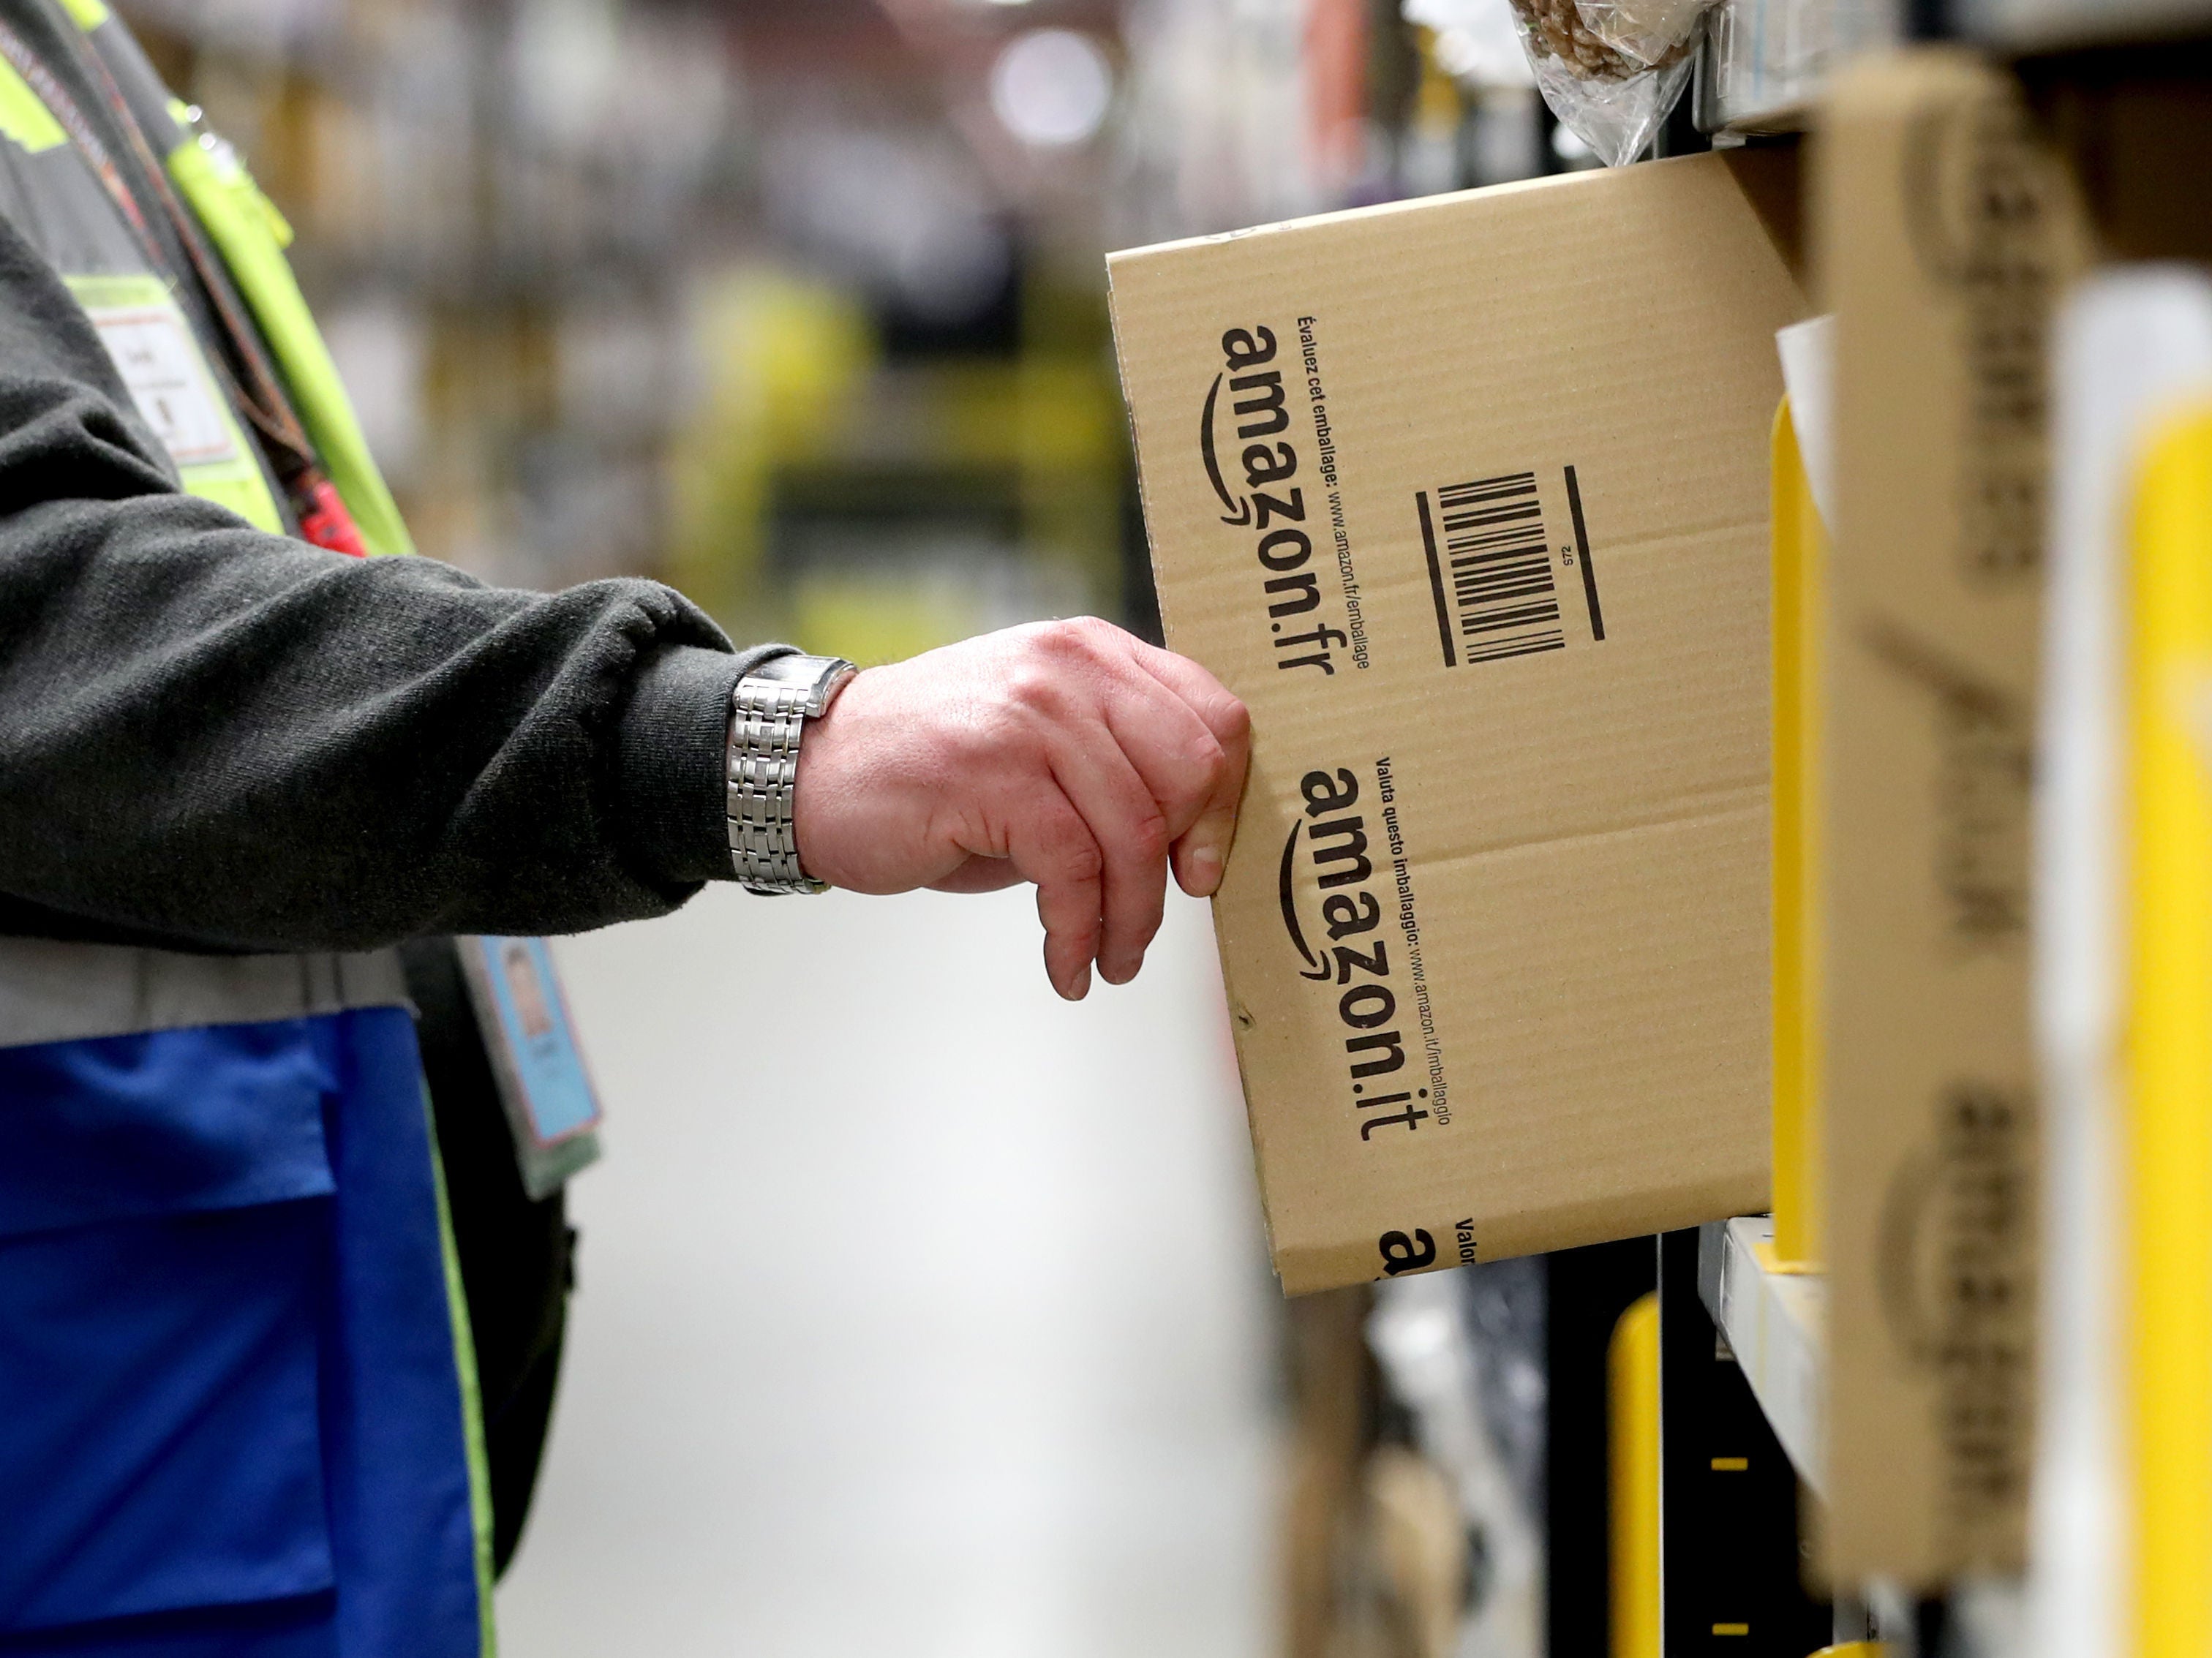 An Amazon associate collecting packaging at the Dunfermline fulfilment centre, Fife